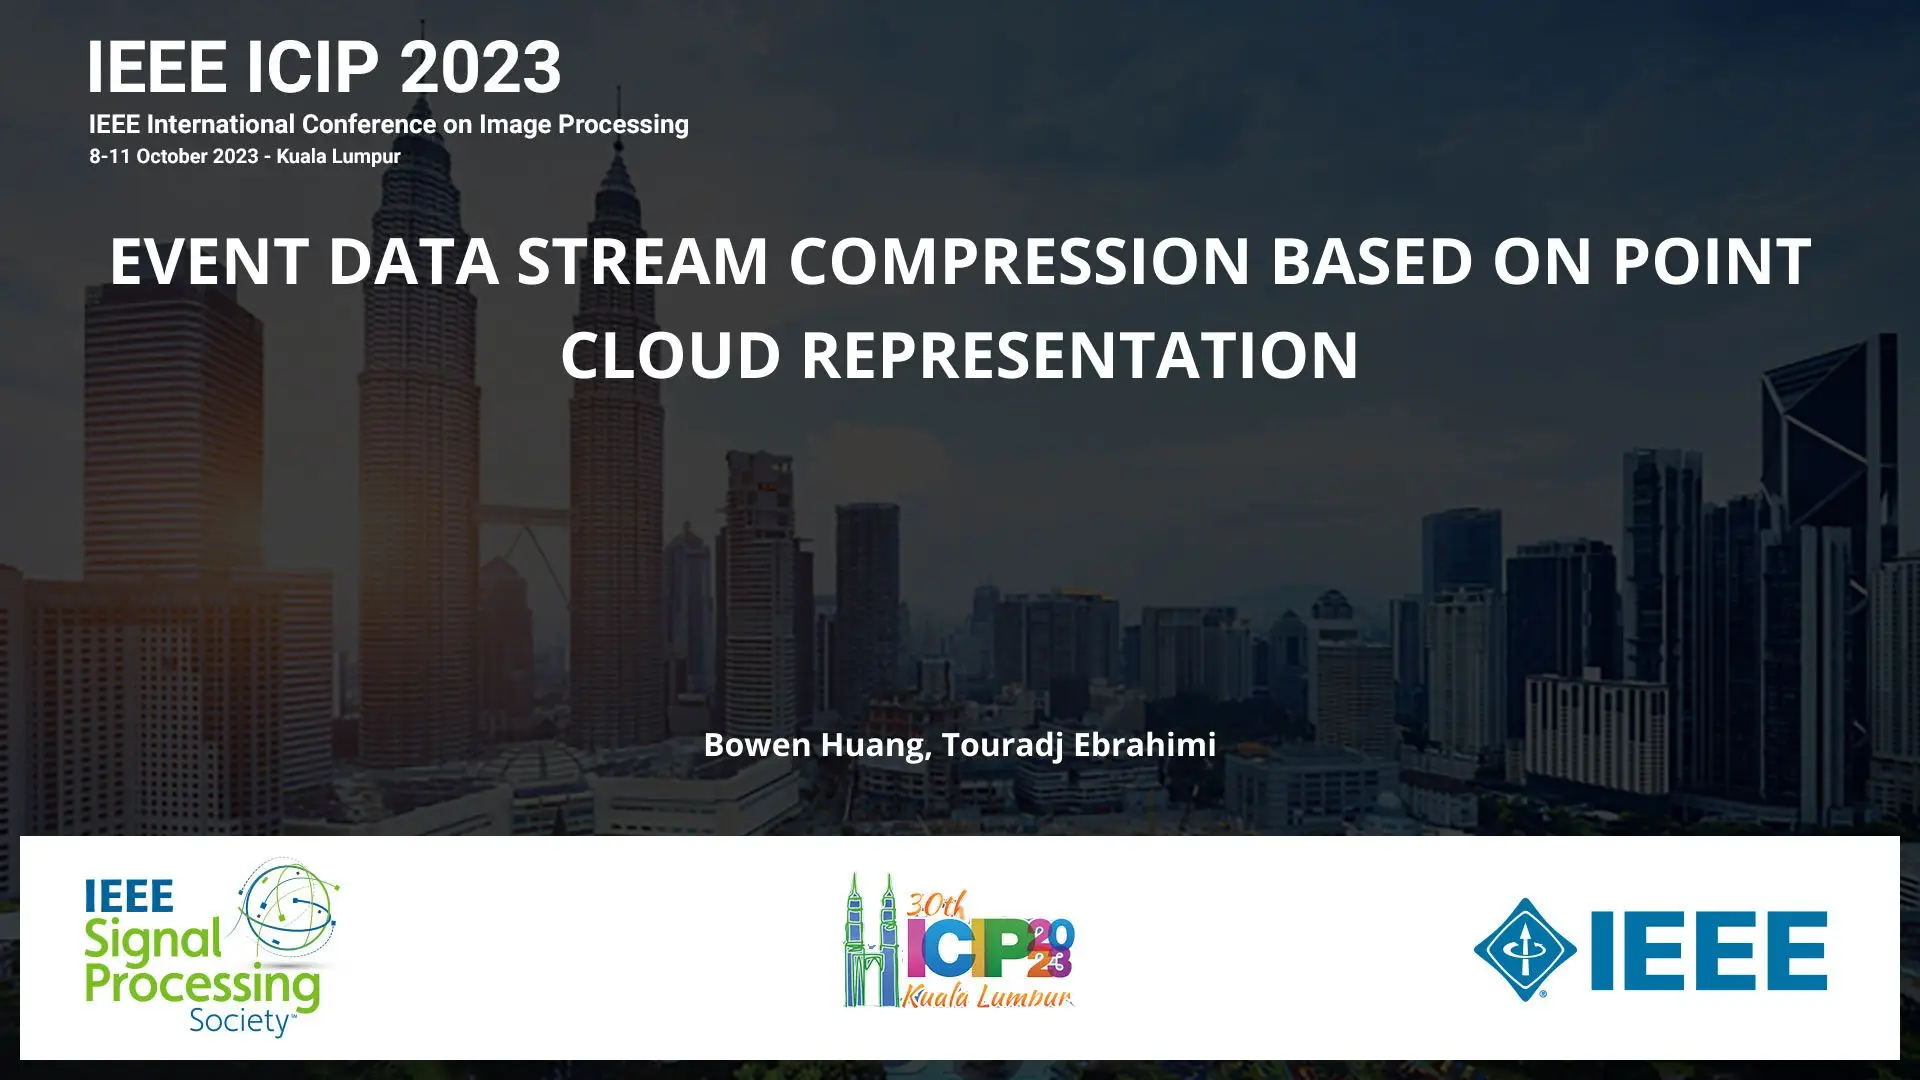 EVENT DATA STREAM COMPRESSION BASED ON POINT CLOUD REPRESENTATION